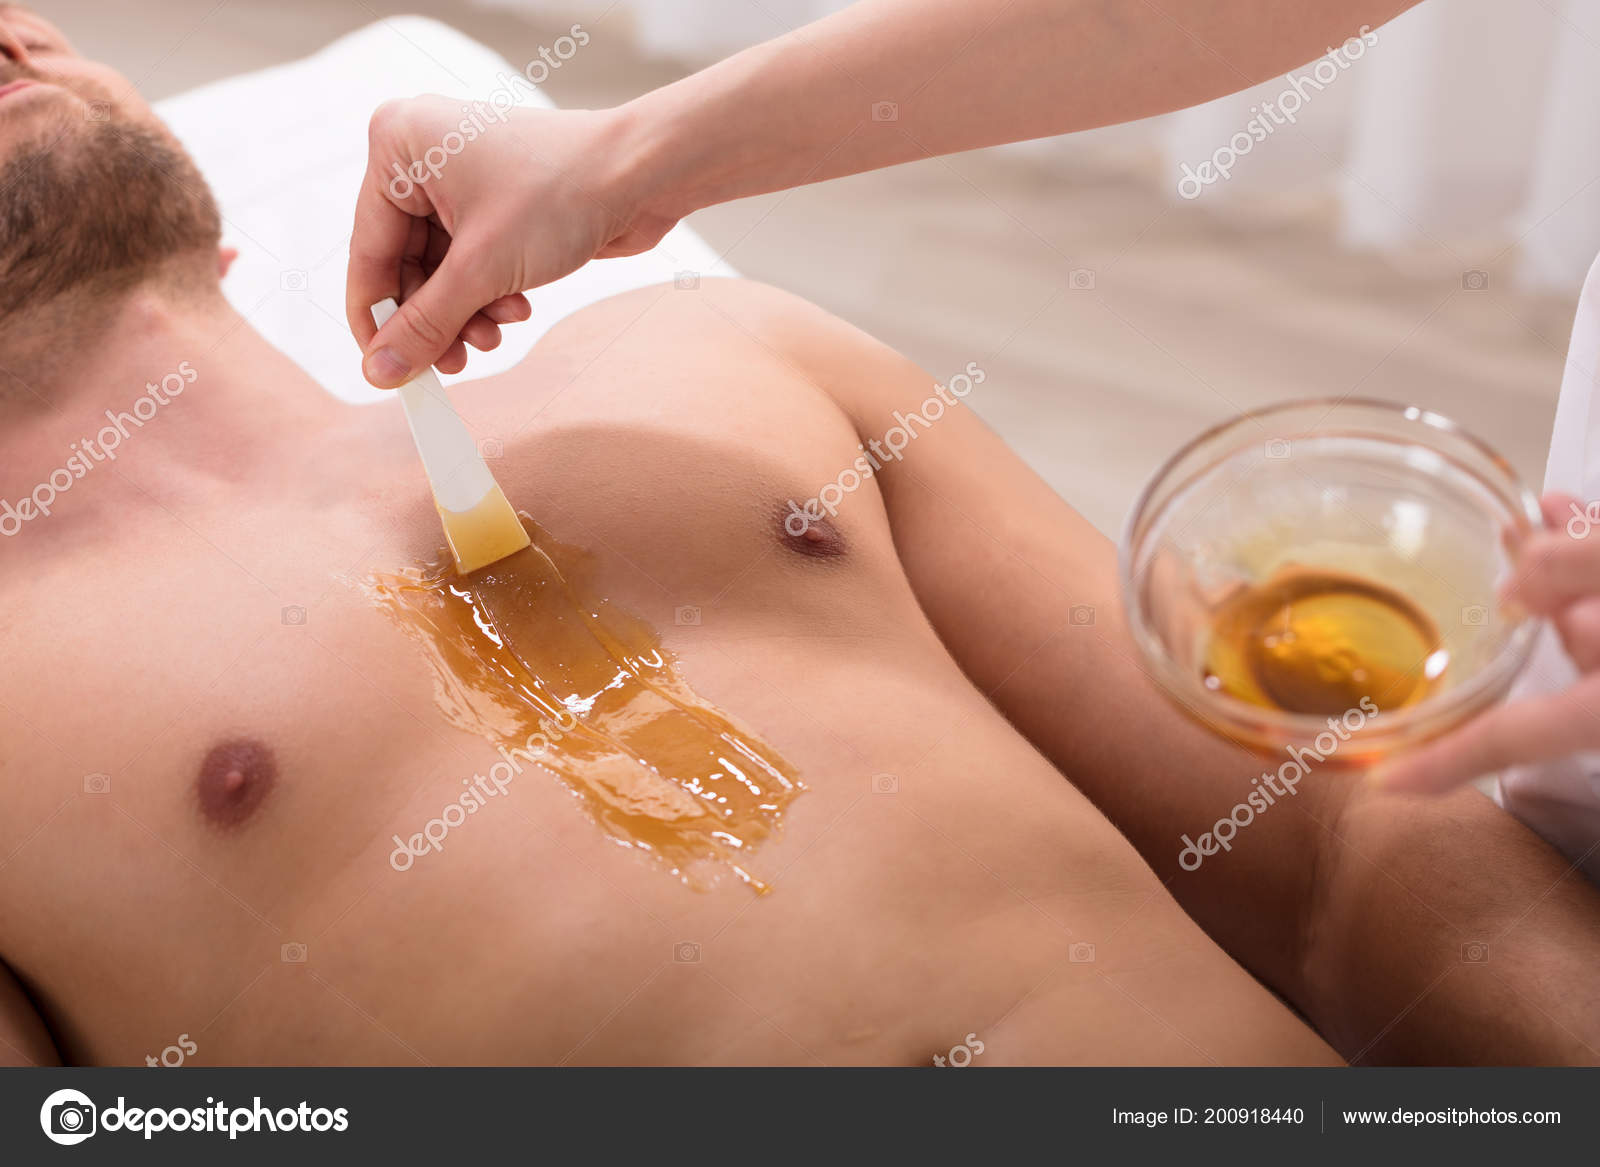 Close-up Of Therapist Hand Applying Wax On Relaxed Young Man's